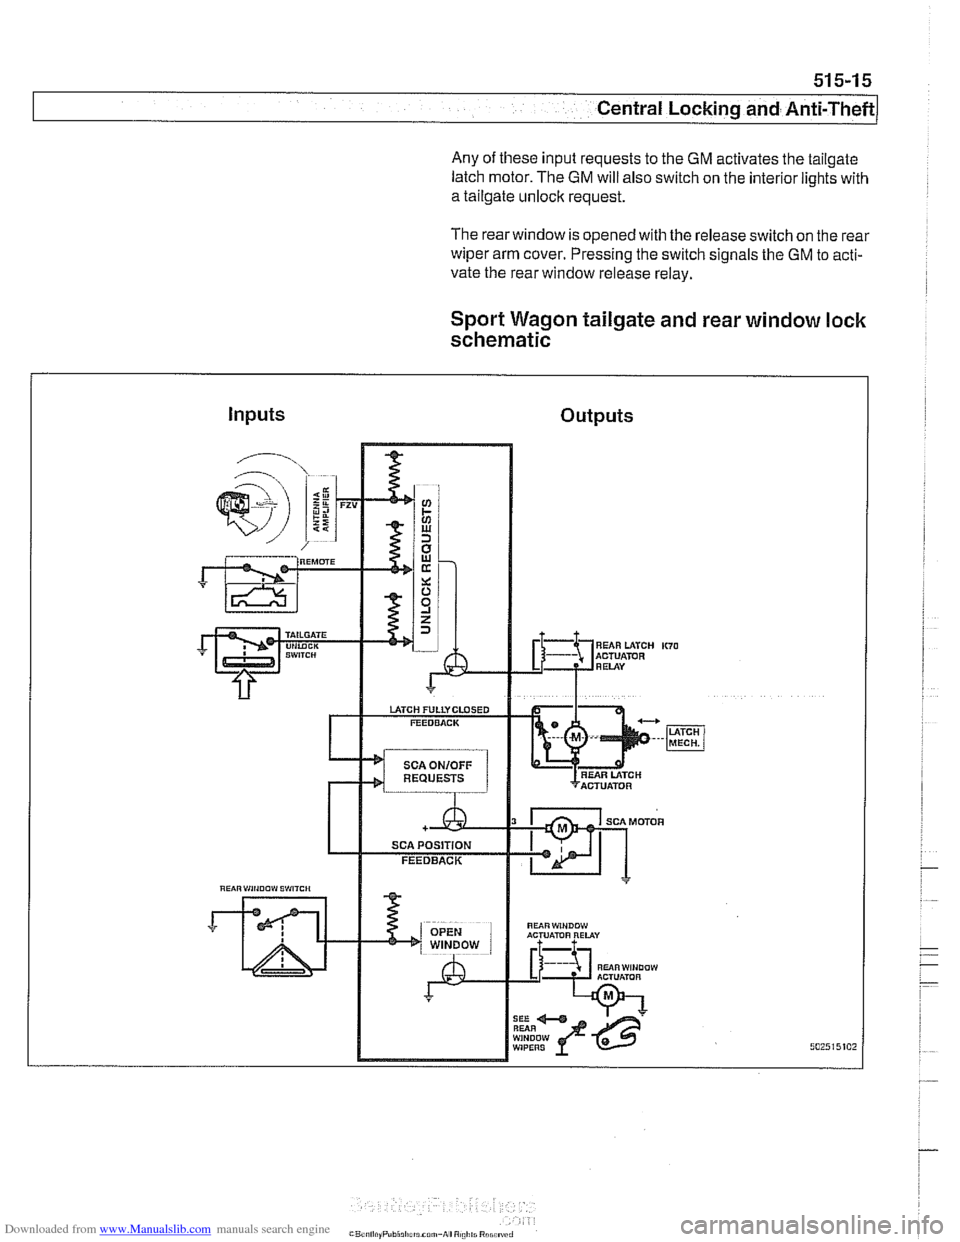 BMW 525i 2001 E39 Workshop Manual Downloaded from www.Manualslib.com manuals search engine 
51 5-1 5 
Central Locking and Anti-Theft 
Any  of these input requests to  the GM activates  the tailgate 
latch motor.  The 
GM will also swi